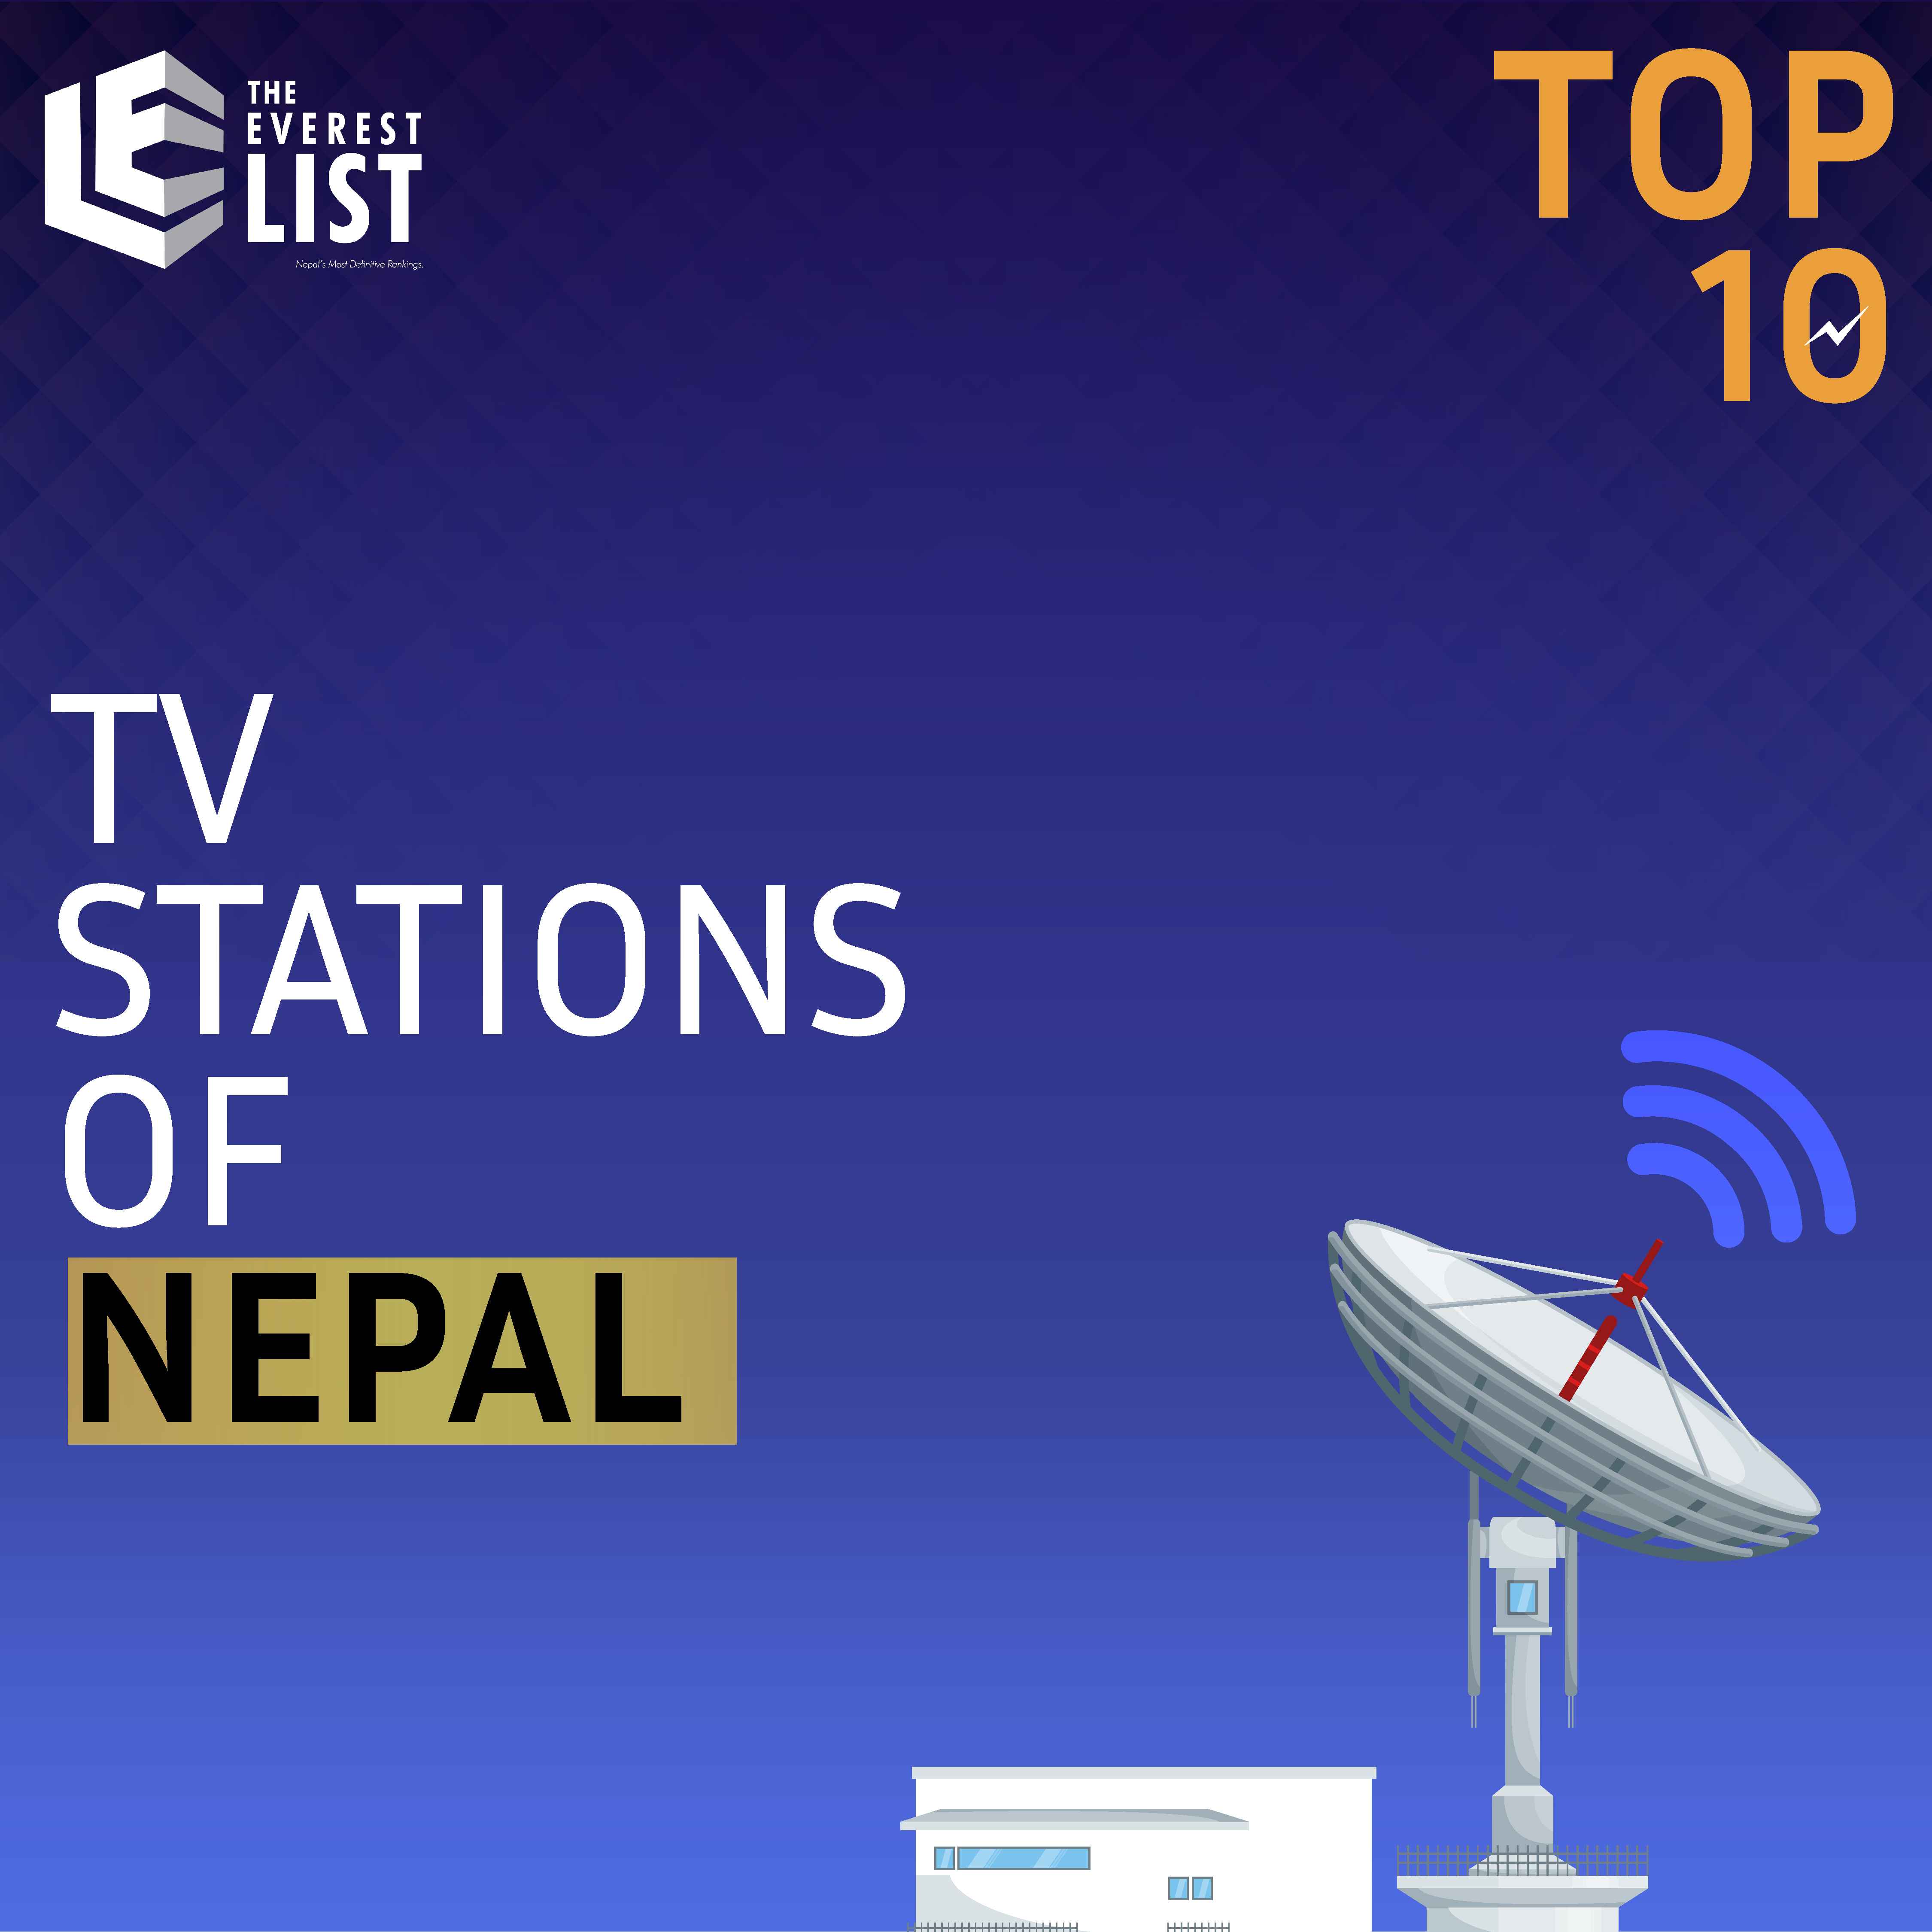 TOP 10 Television Stations of Nepal